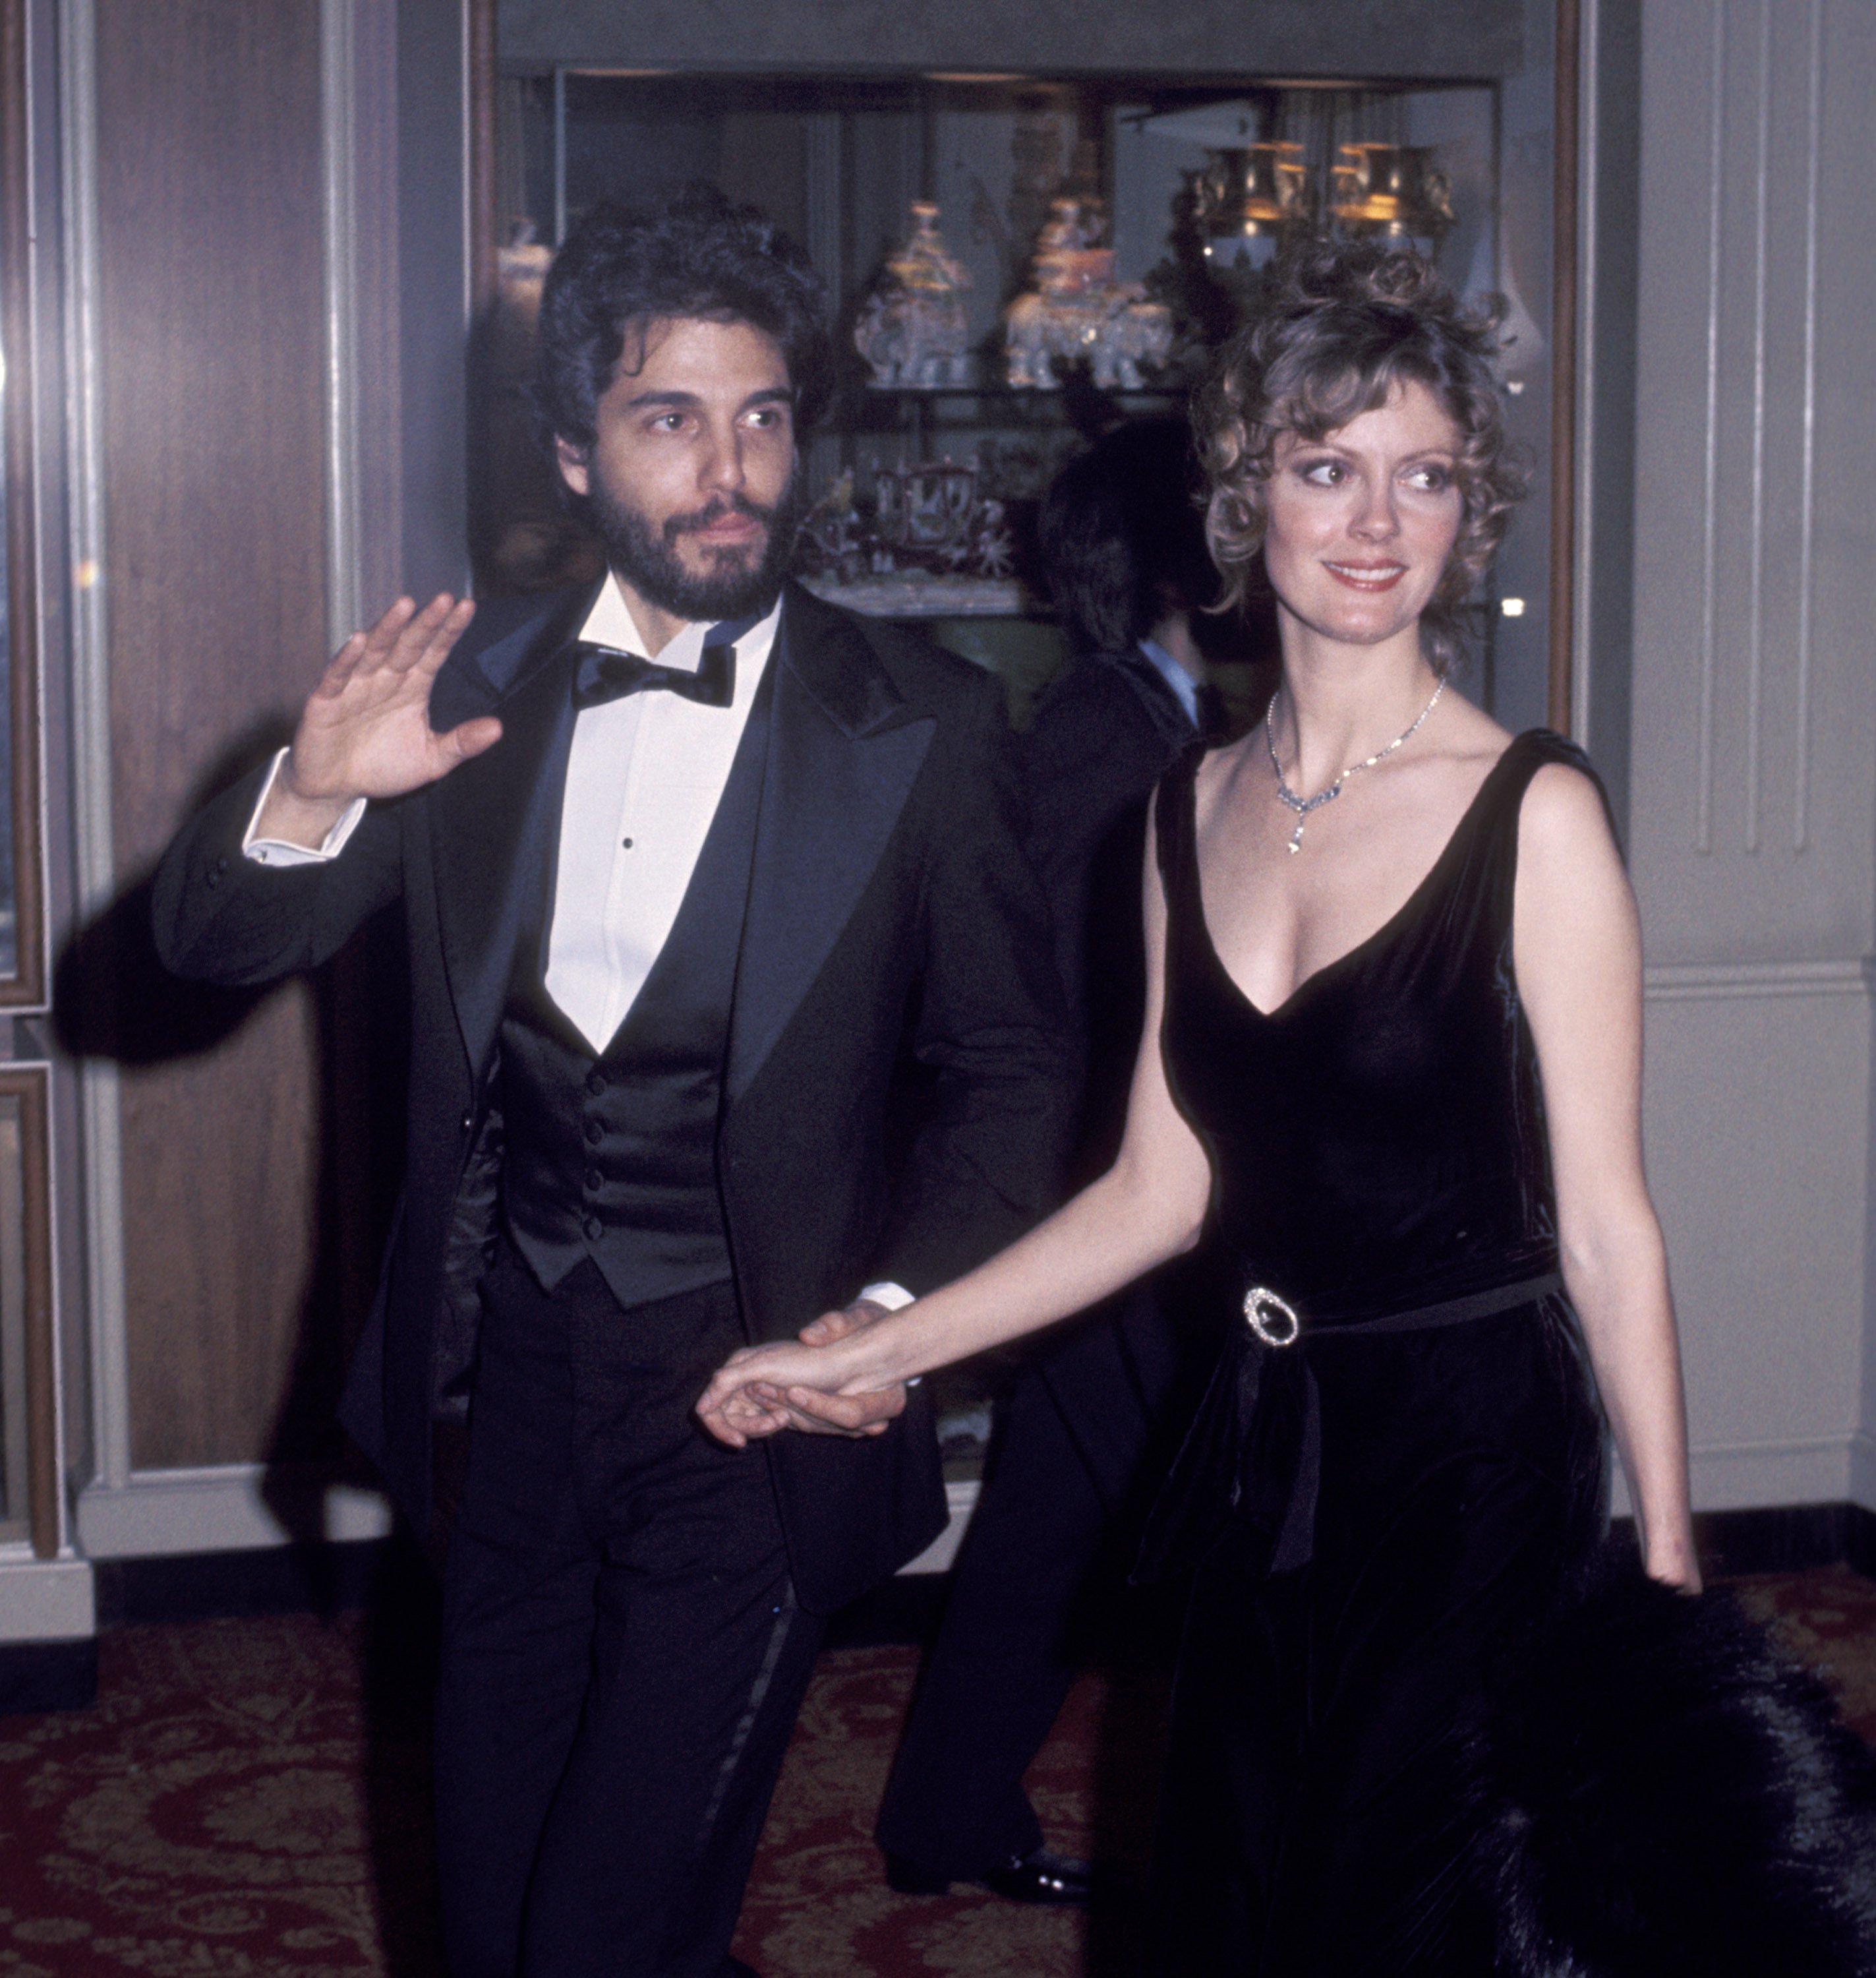 Chris Sarandon and Susan Sarandon at the Beverly Hilton Hotel on January 1, 1975 | Source: Getty Images